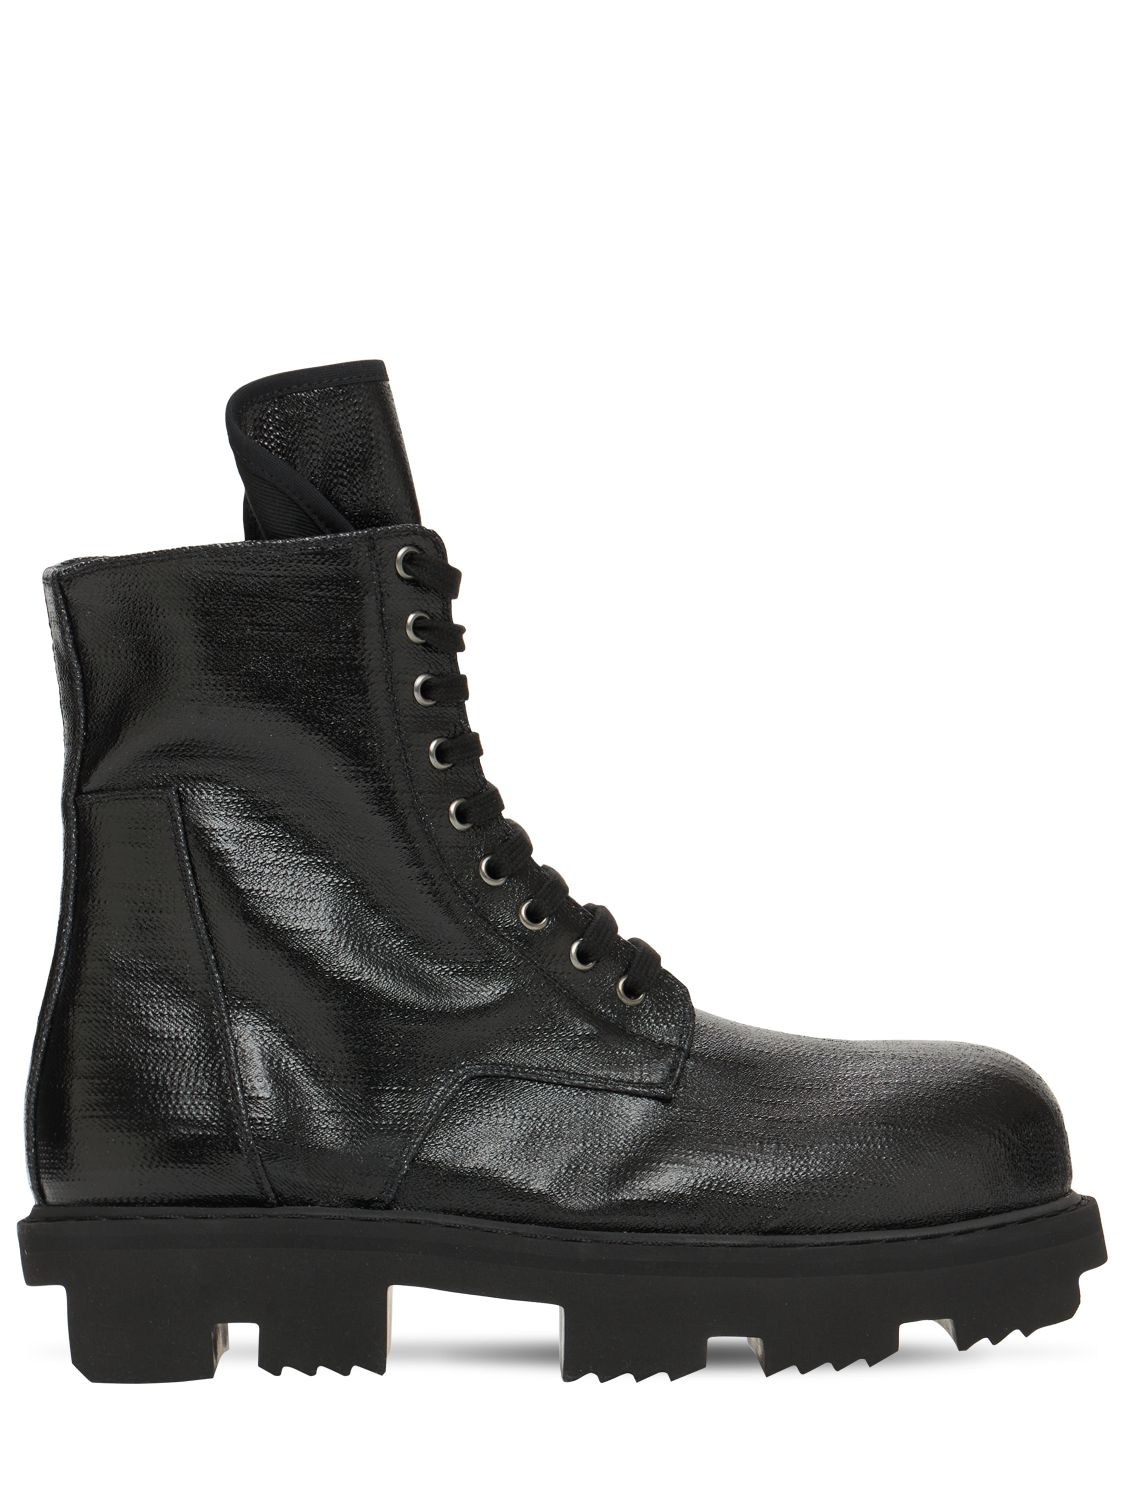 Rick Owens Cotton Denim Army Megatooth Boots In Black